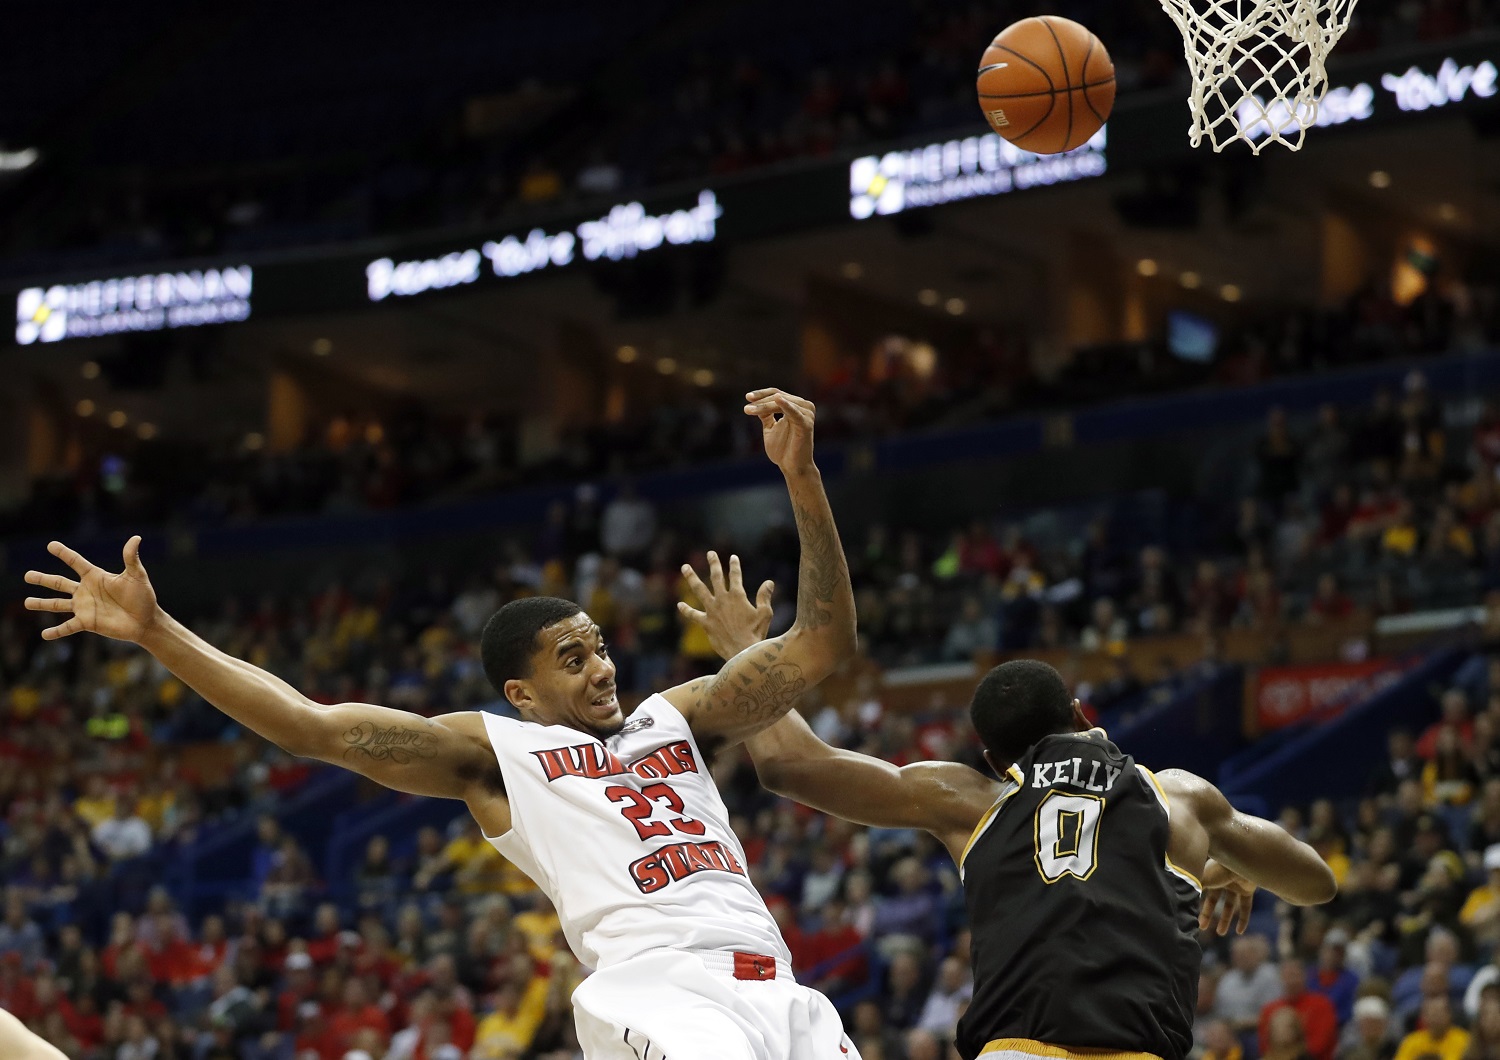 Illinois State's Deontae Hawkins, left, loses control of the ball after colliding with Wichita State's Rashard Kelly during the first half of an NCAA college basketball game in the championship of the Missouri Valley Conference men's tournament, Sunday, March 5, 2017, in St. Louis. (AP Photo/Jeff Roberson)